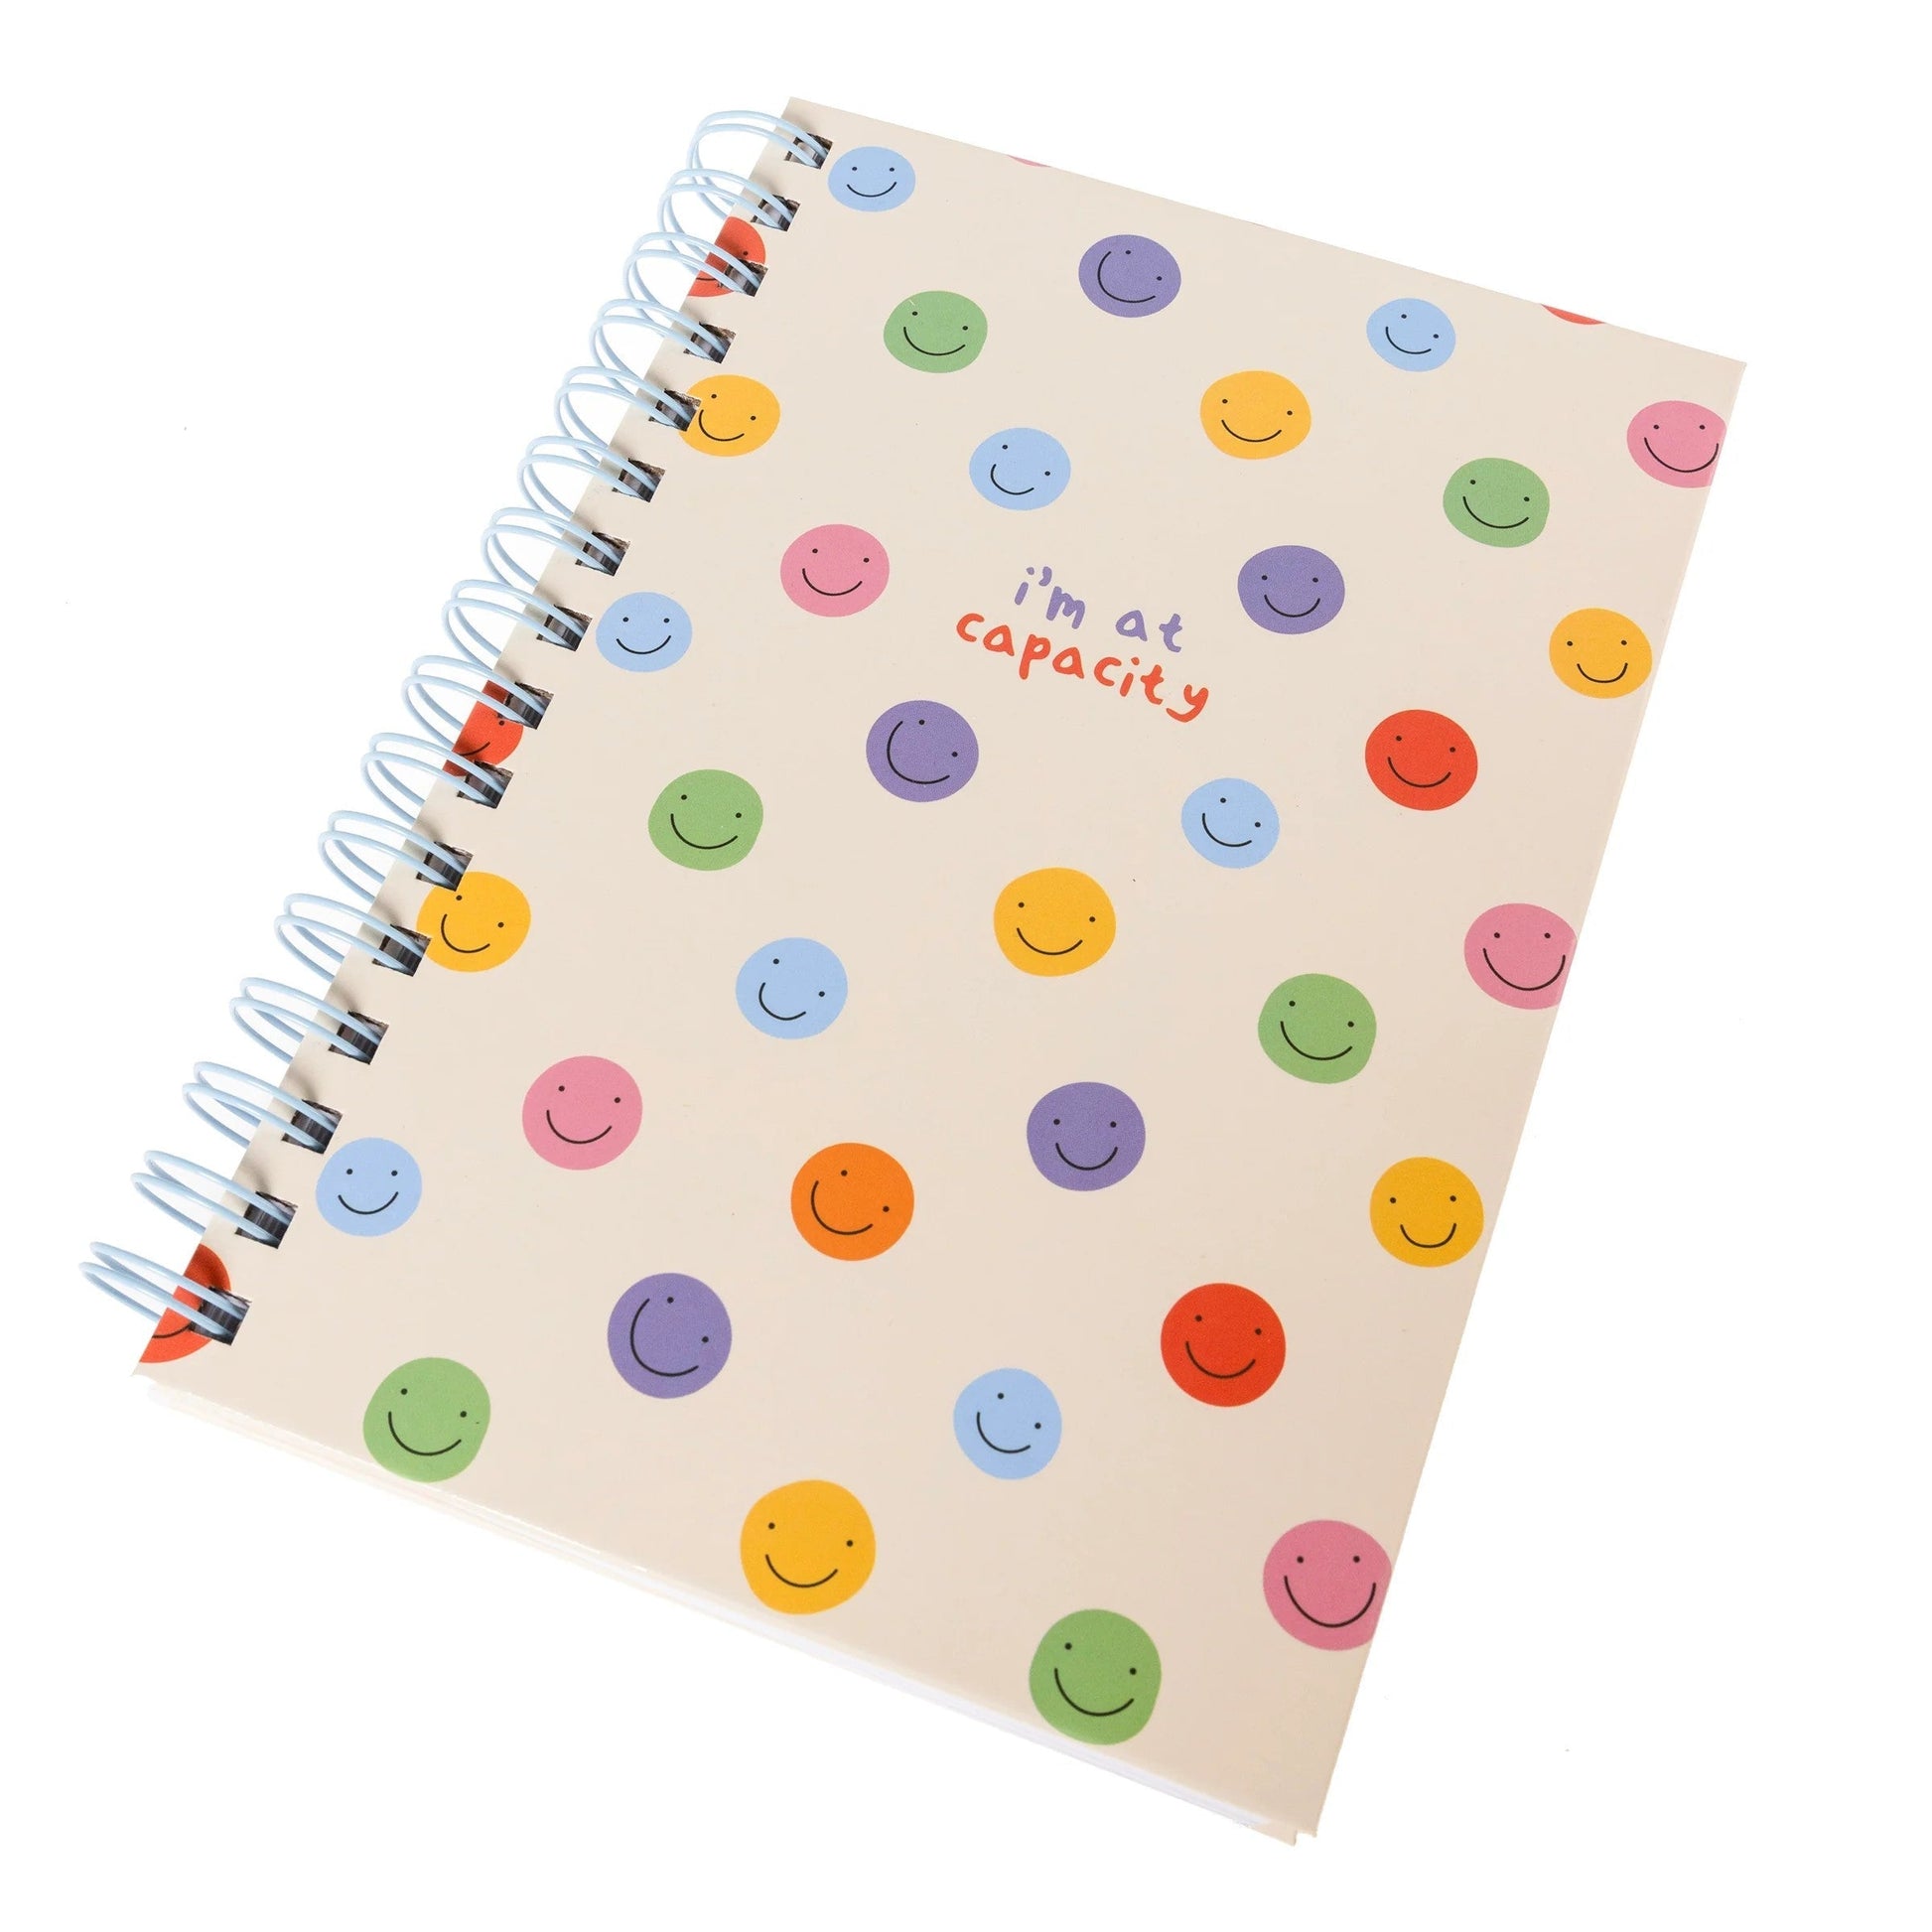 I‘m At Capacity Spiral Hard Cover Journal in Colorful Smiley Designs | 160 Ruled Pages Spiral-bound Notebook | 6.25"x 8.25"